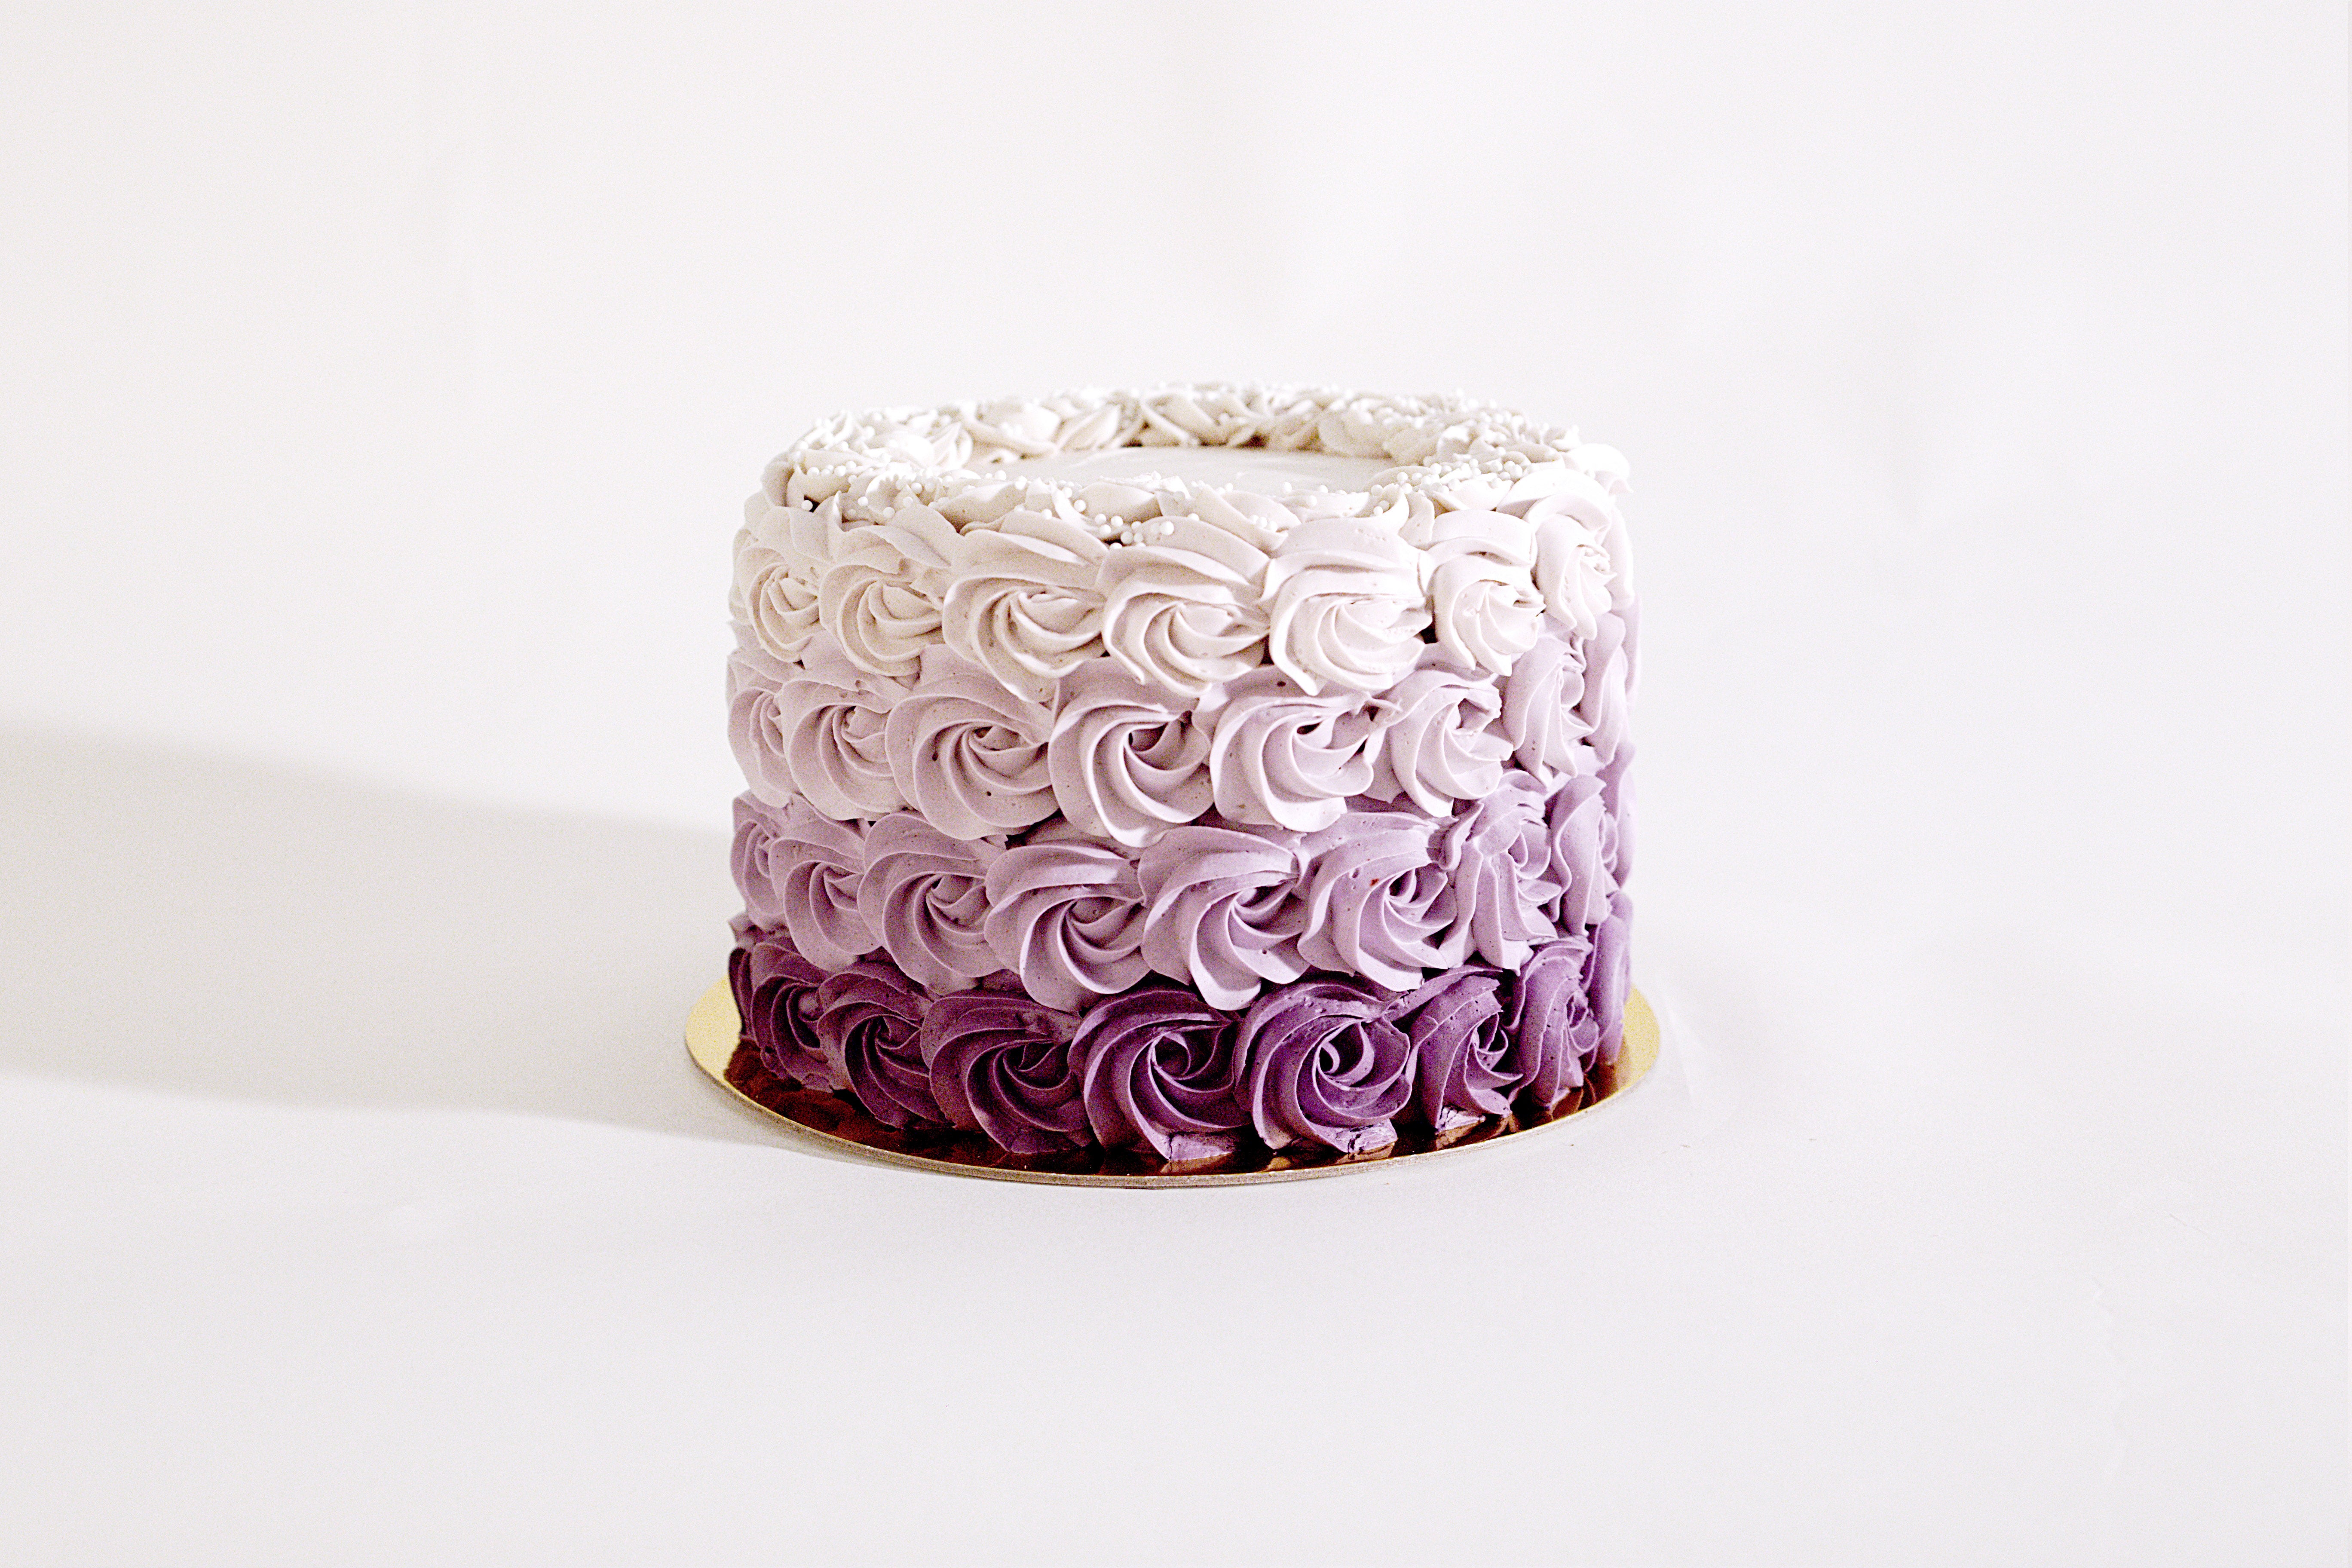 Pink Rose Ombré Cake | Tiered cakes birthday, Rose cake, Rose ombre cake